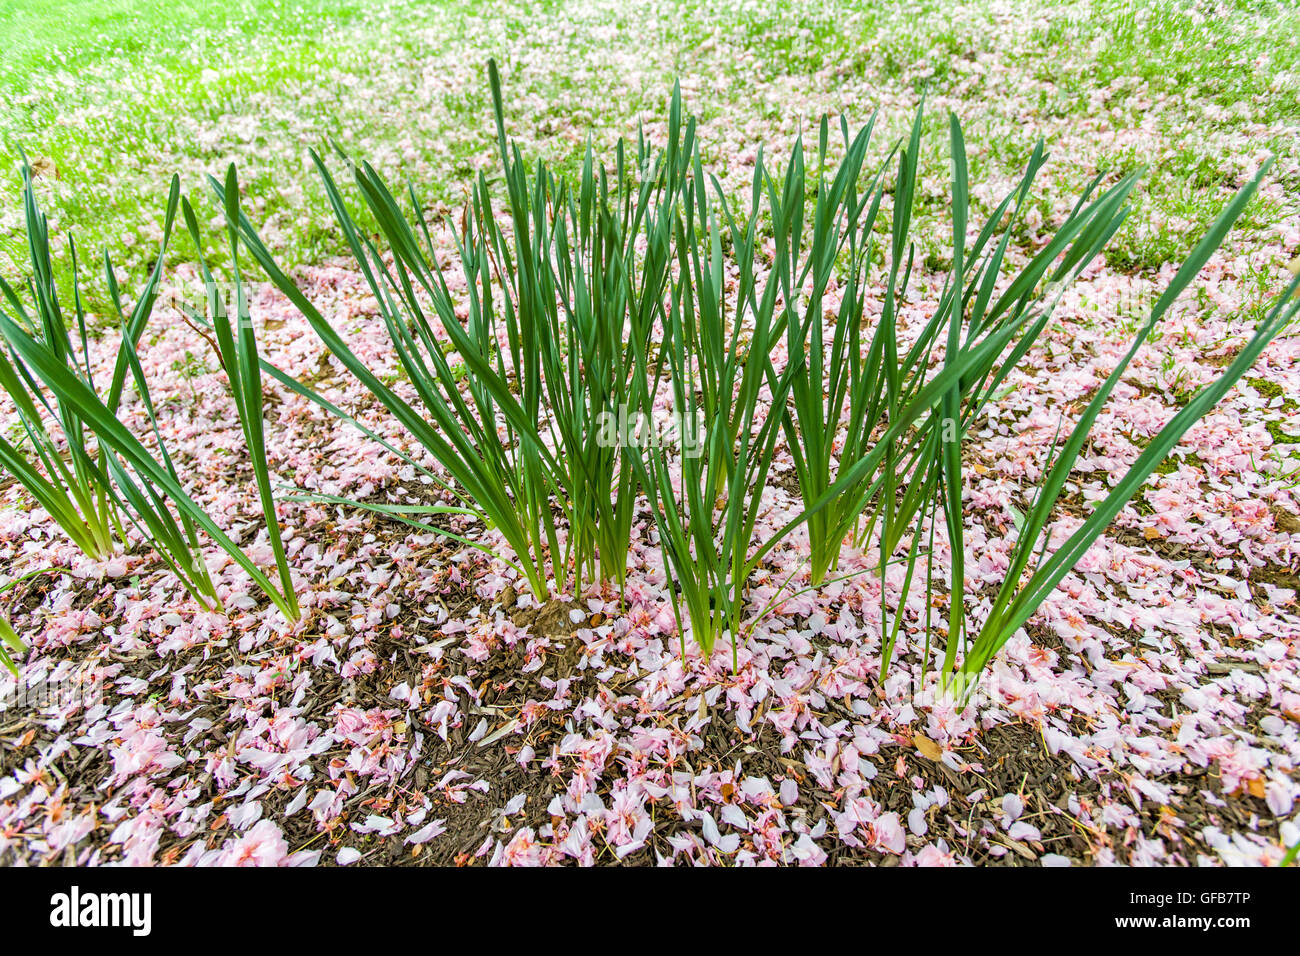 Japanese Cherry Blossoms on the ground around daffodil stalks. Stock Photo